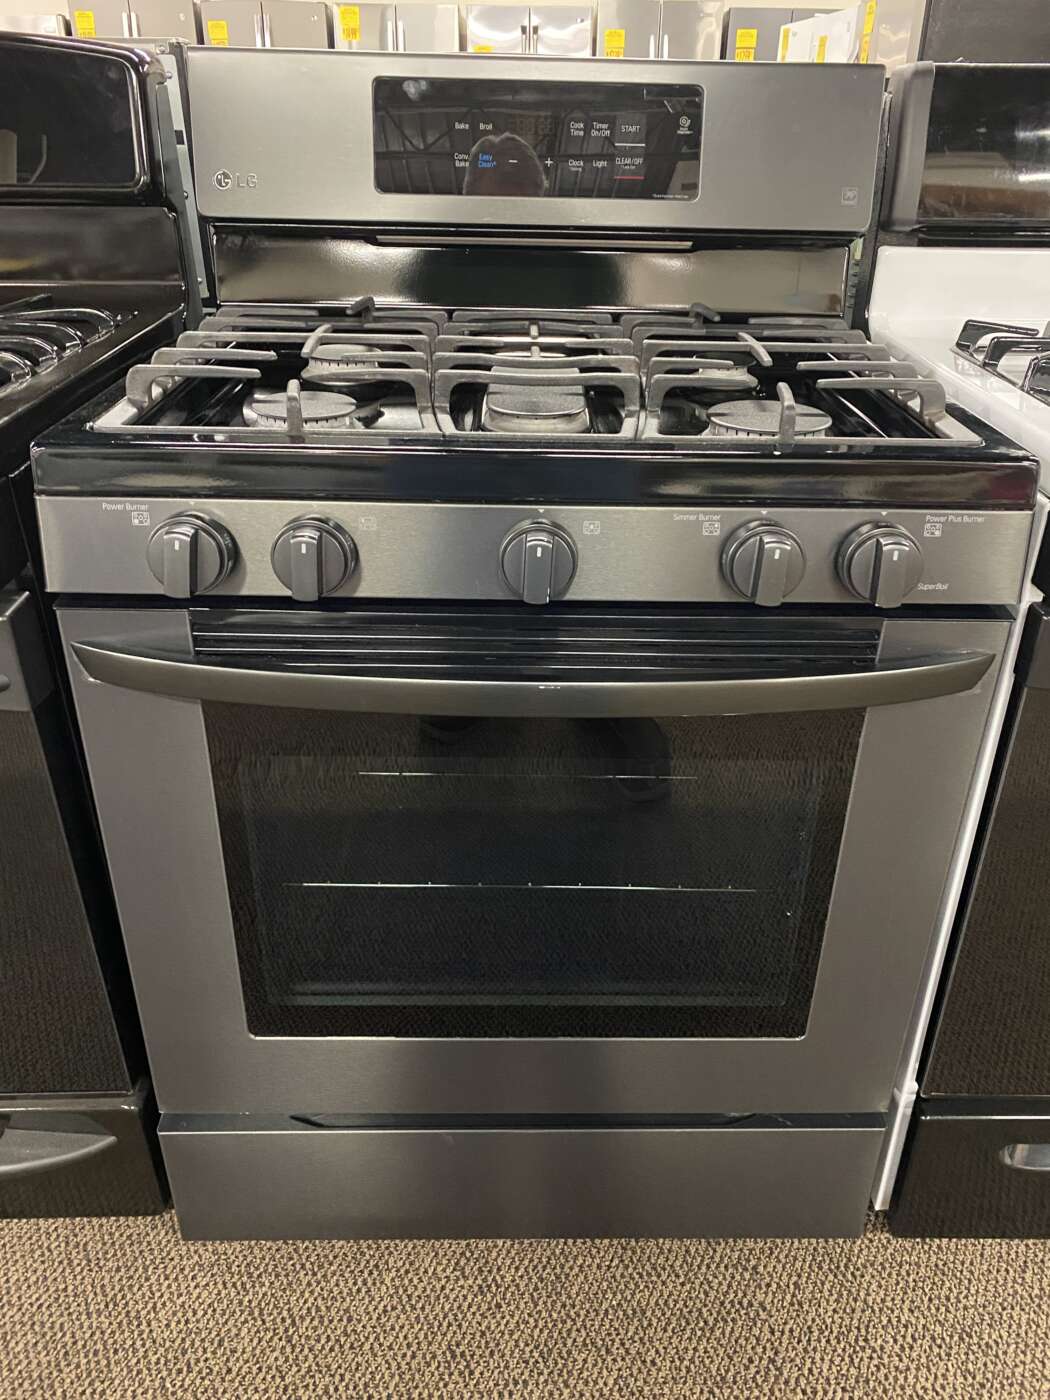 Reconditioned L/G Self-Clean Convection-Oven GAS Range – Black Stainless